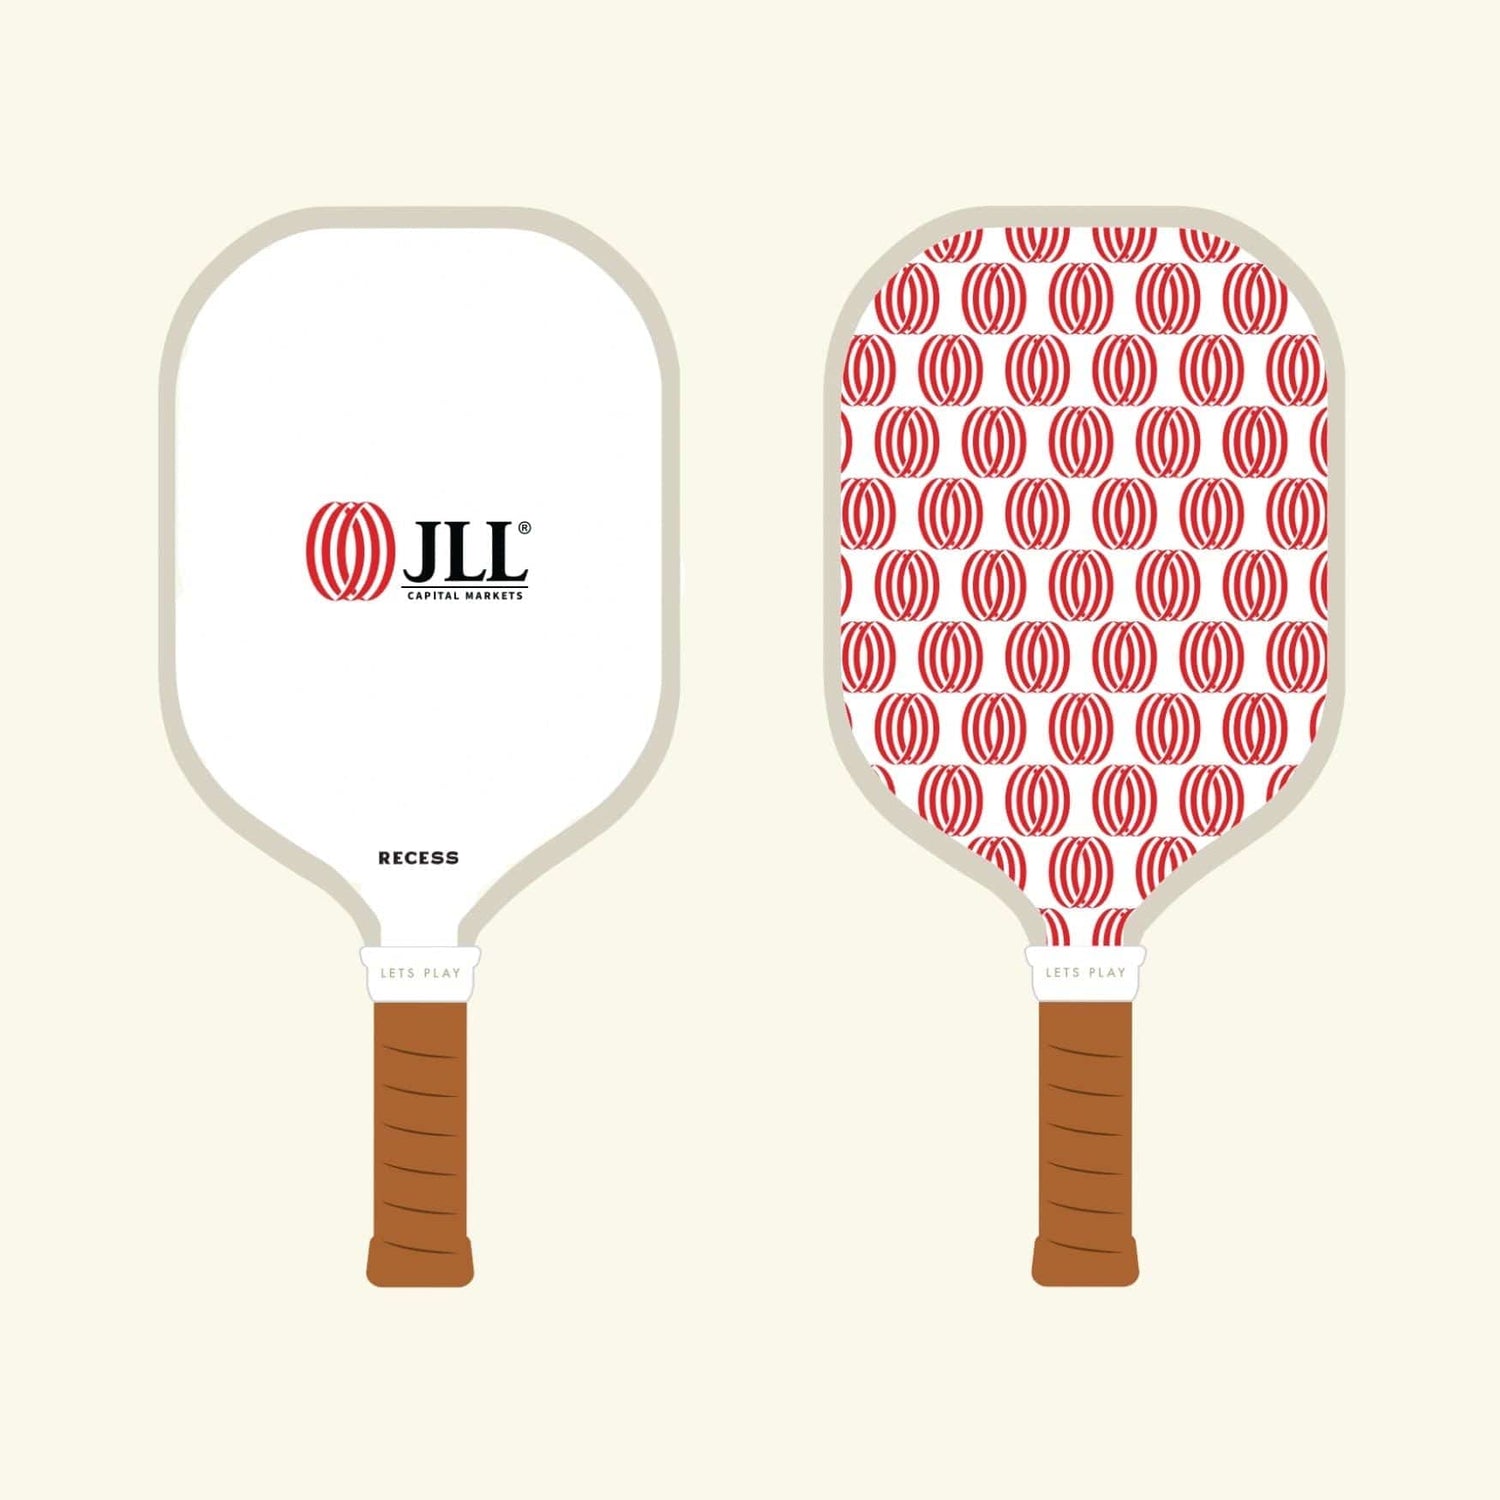 Pickleball lover promo pens with funny quote